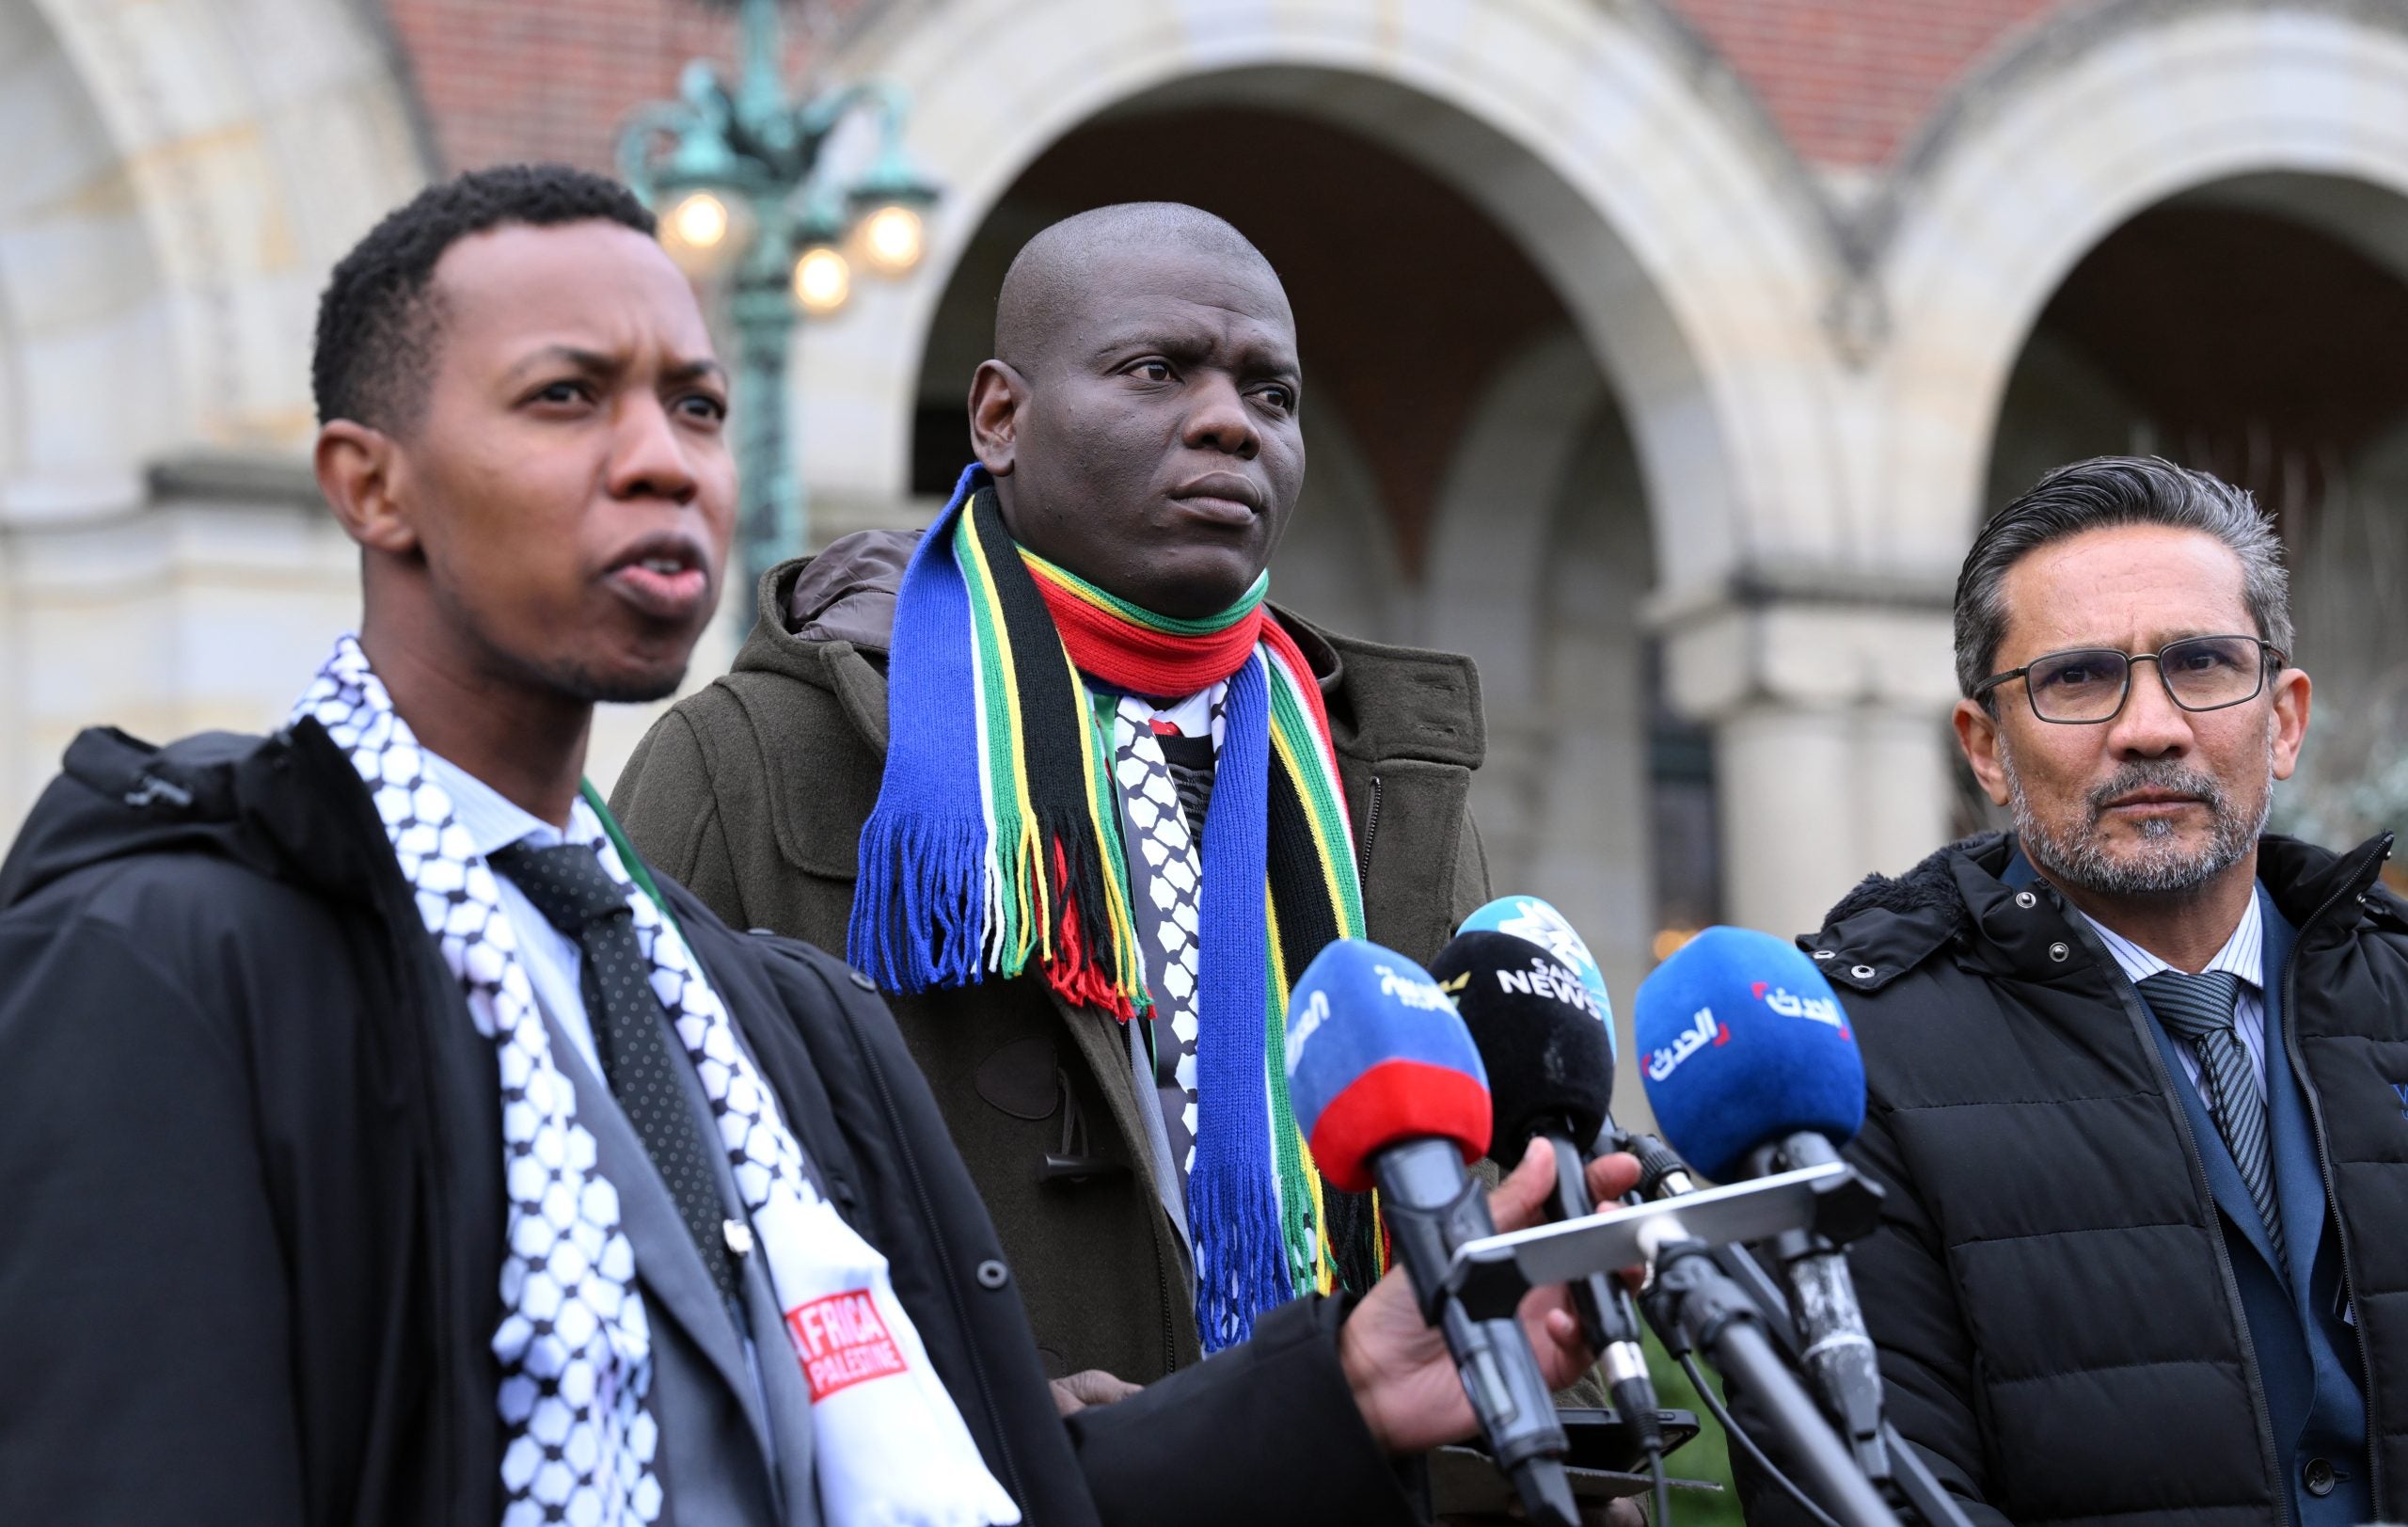 Here’s What You Need To Know About South Africa’s Genocide Case Against Israel